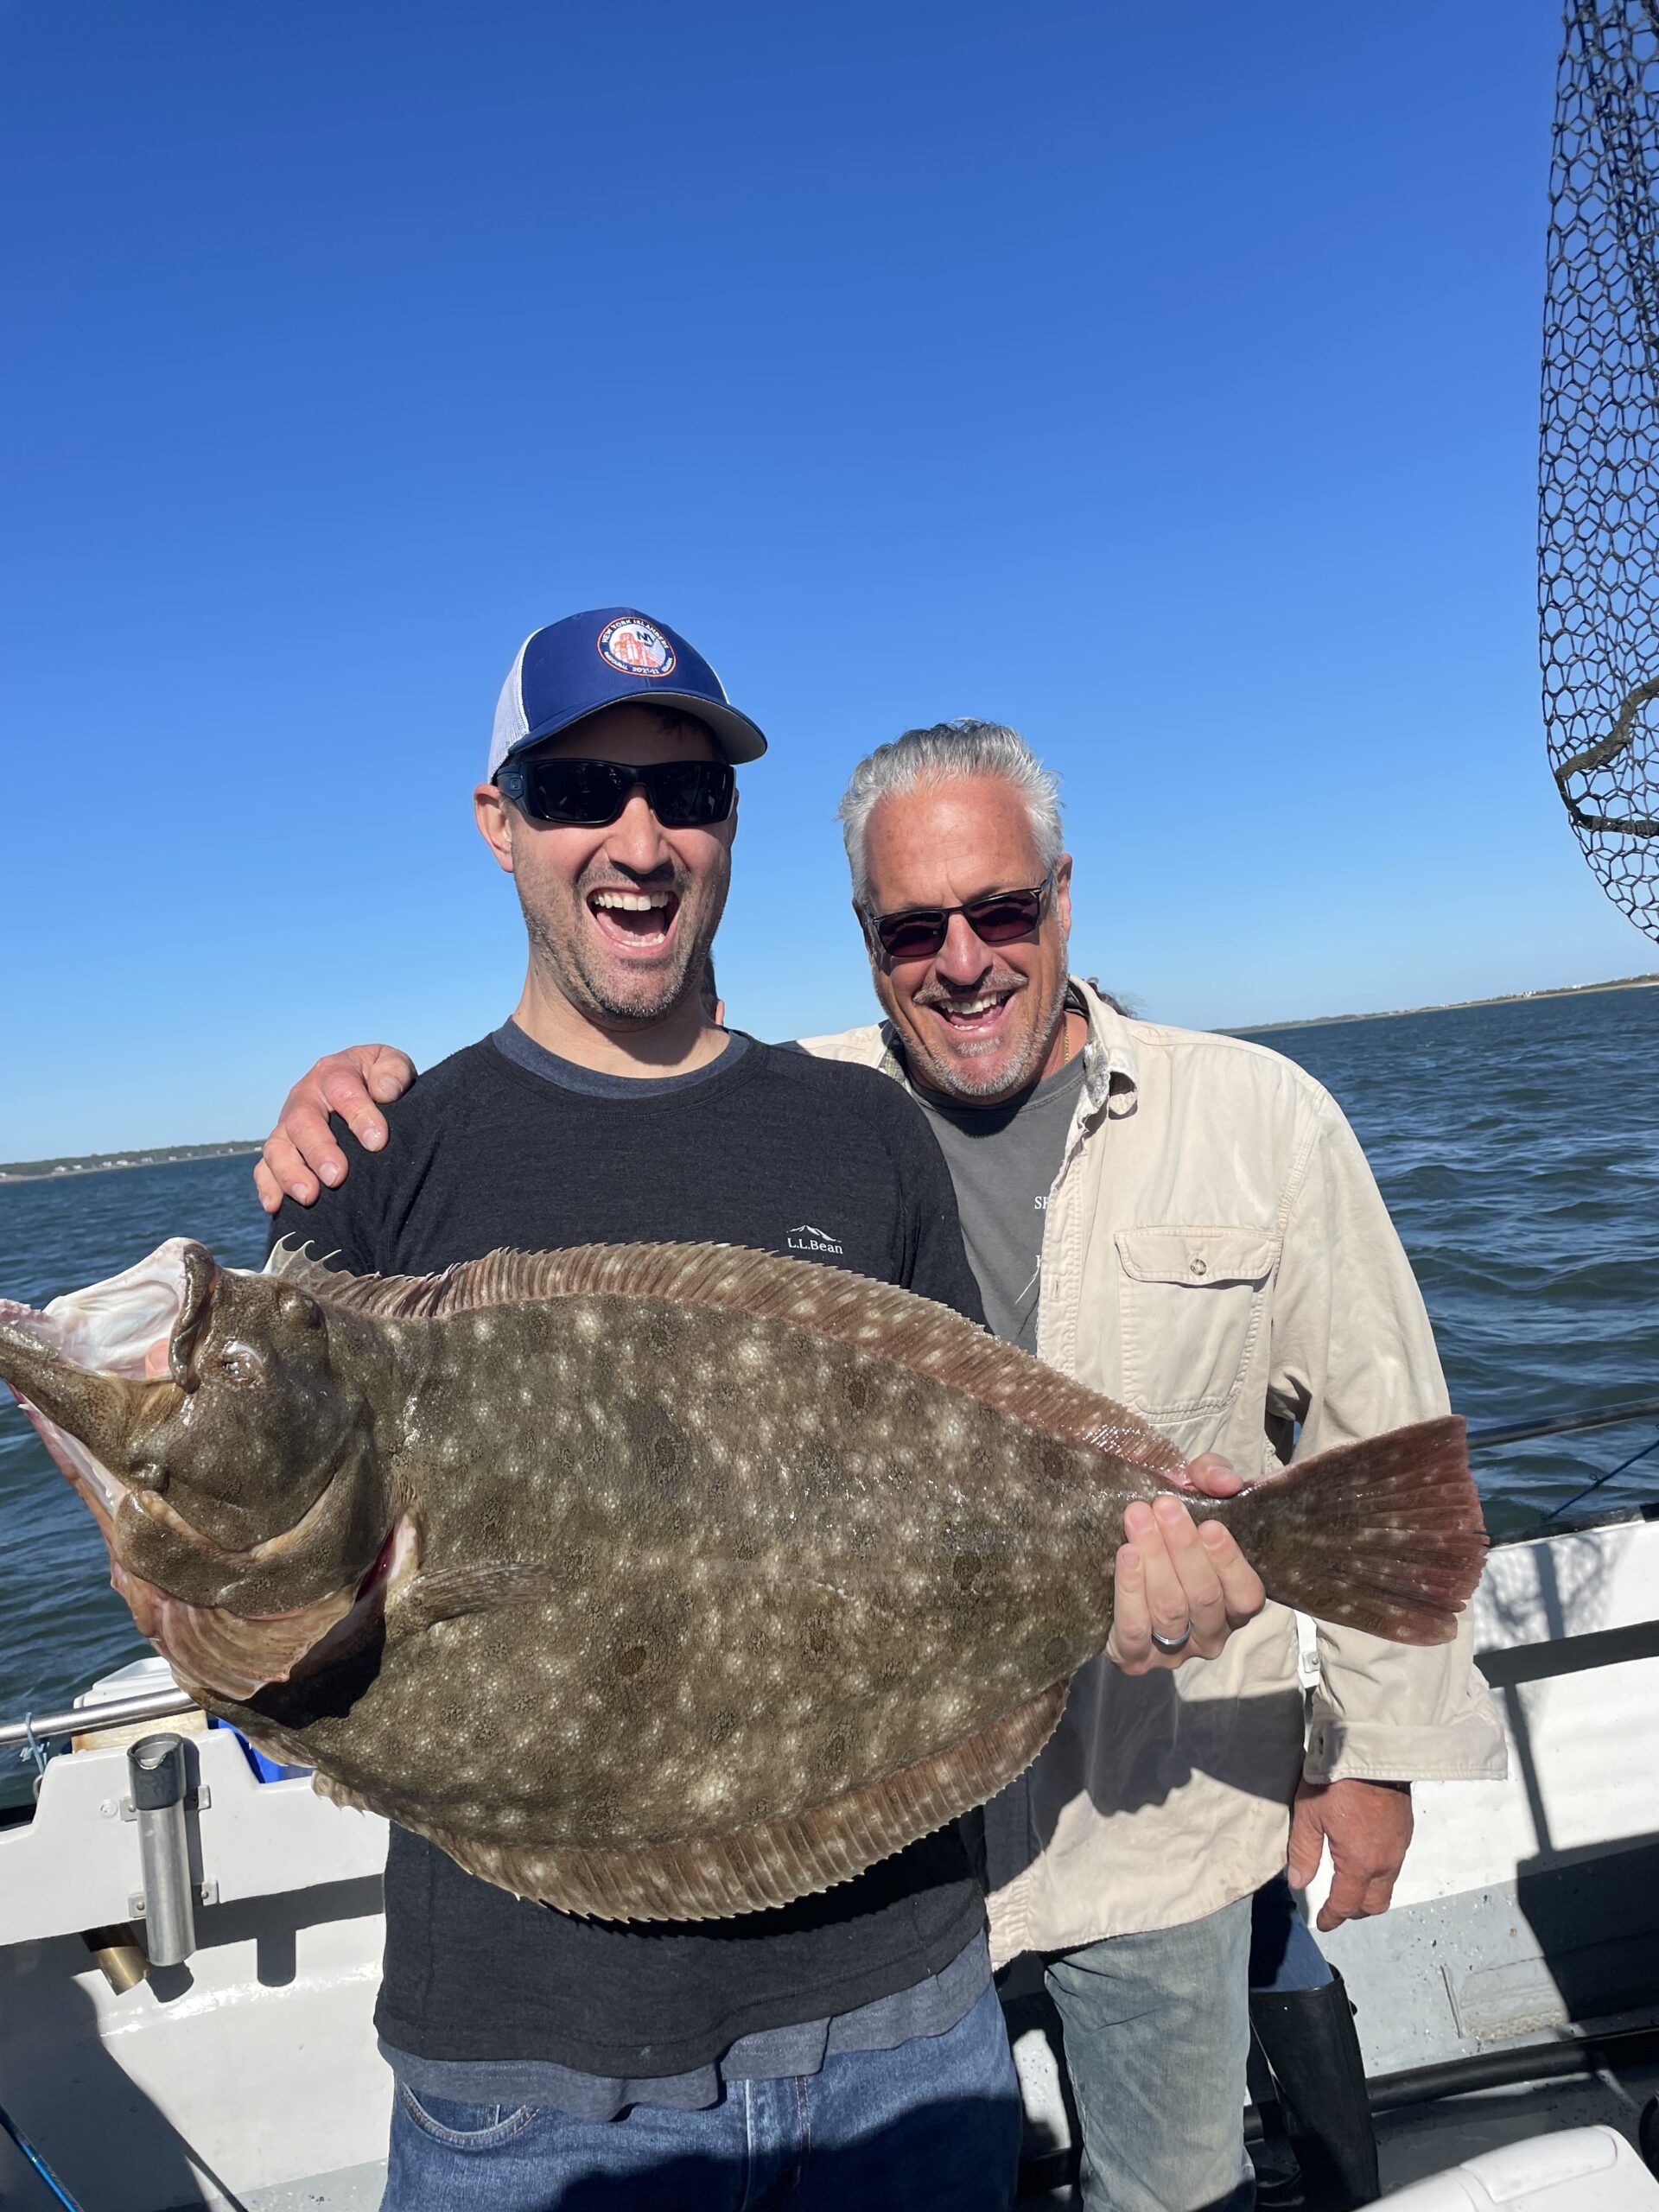 The fluke season went out with a bang for Gary Lavery and Capt. John Capuano of the Shinnecock Star party boat. Lavery decked this 14-pound doormat in just 8 feet of water in Shinnecock Bay last week. No Gulp! No fancy bucktail or complicated rig. Just a spearing and a piece of fluke belly on a hook.